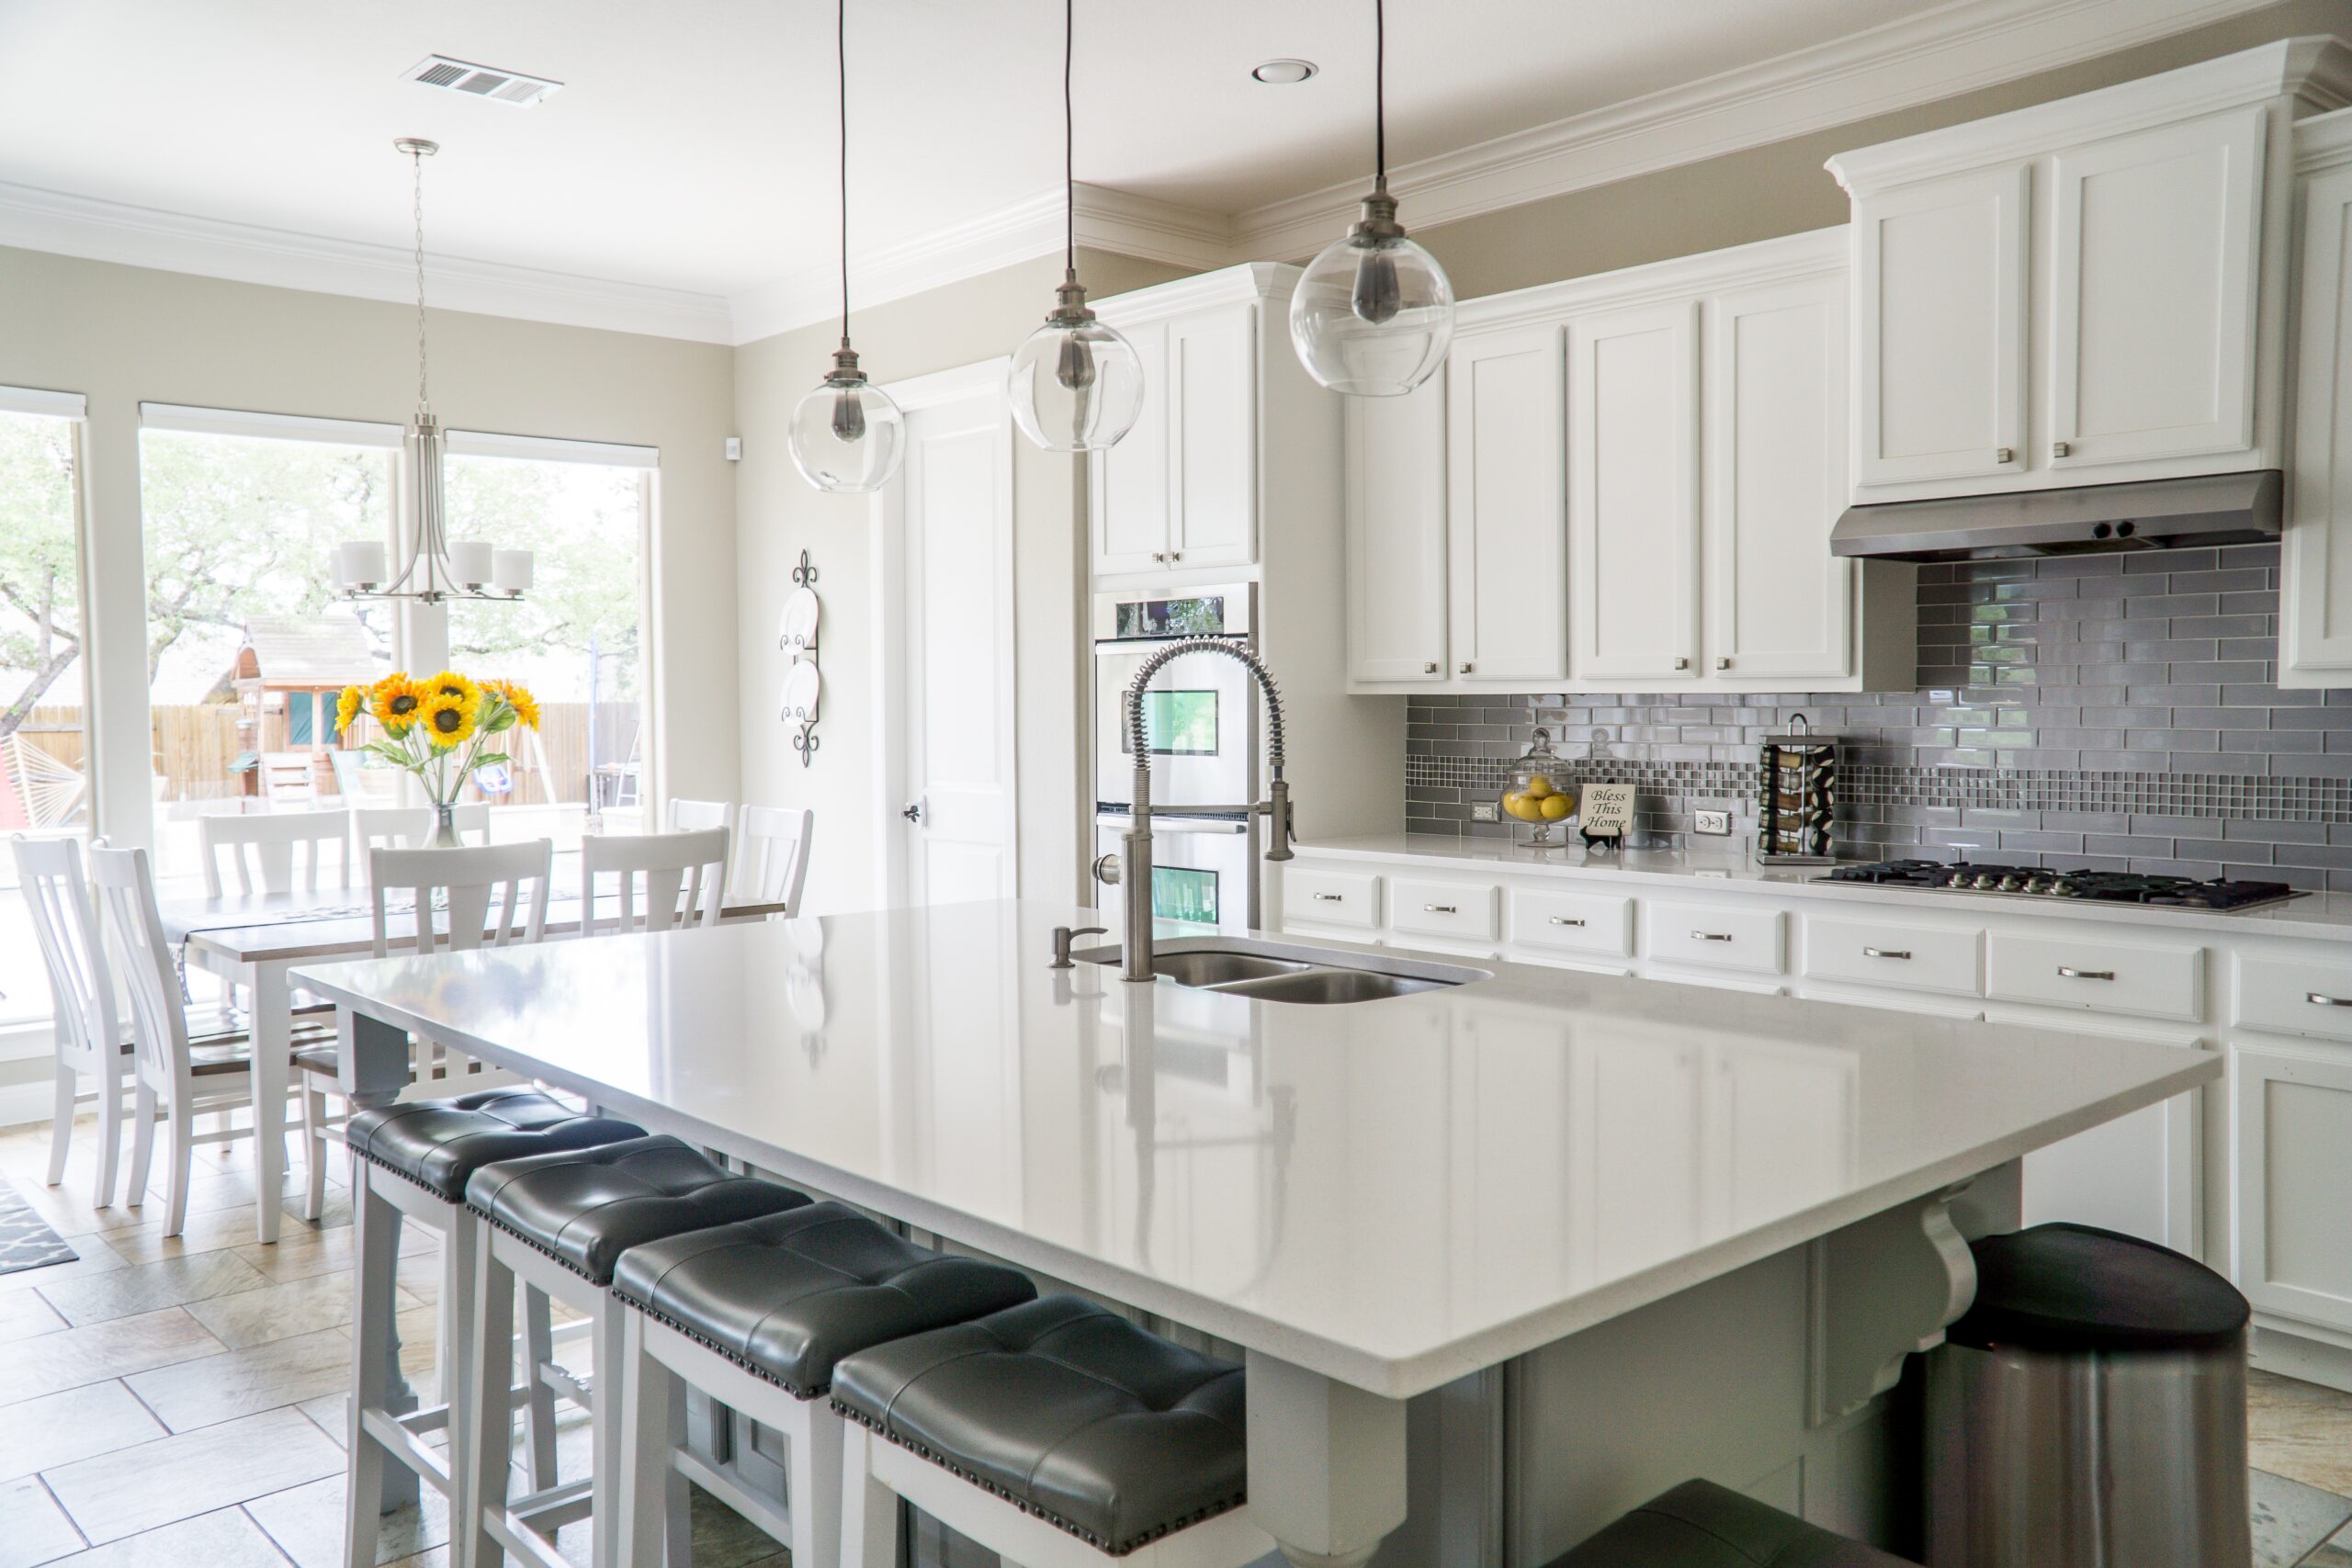 What’s Trending in Kitchen Remodeling?